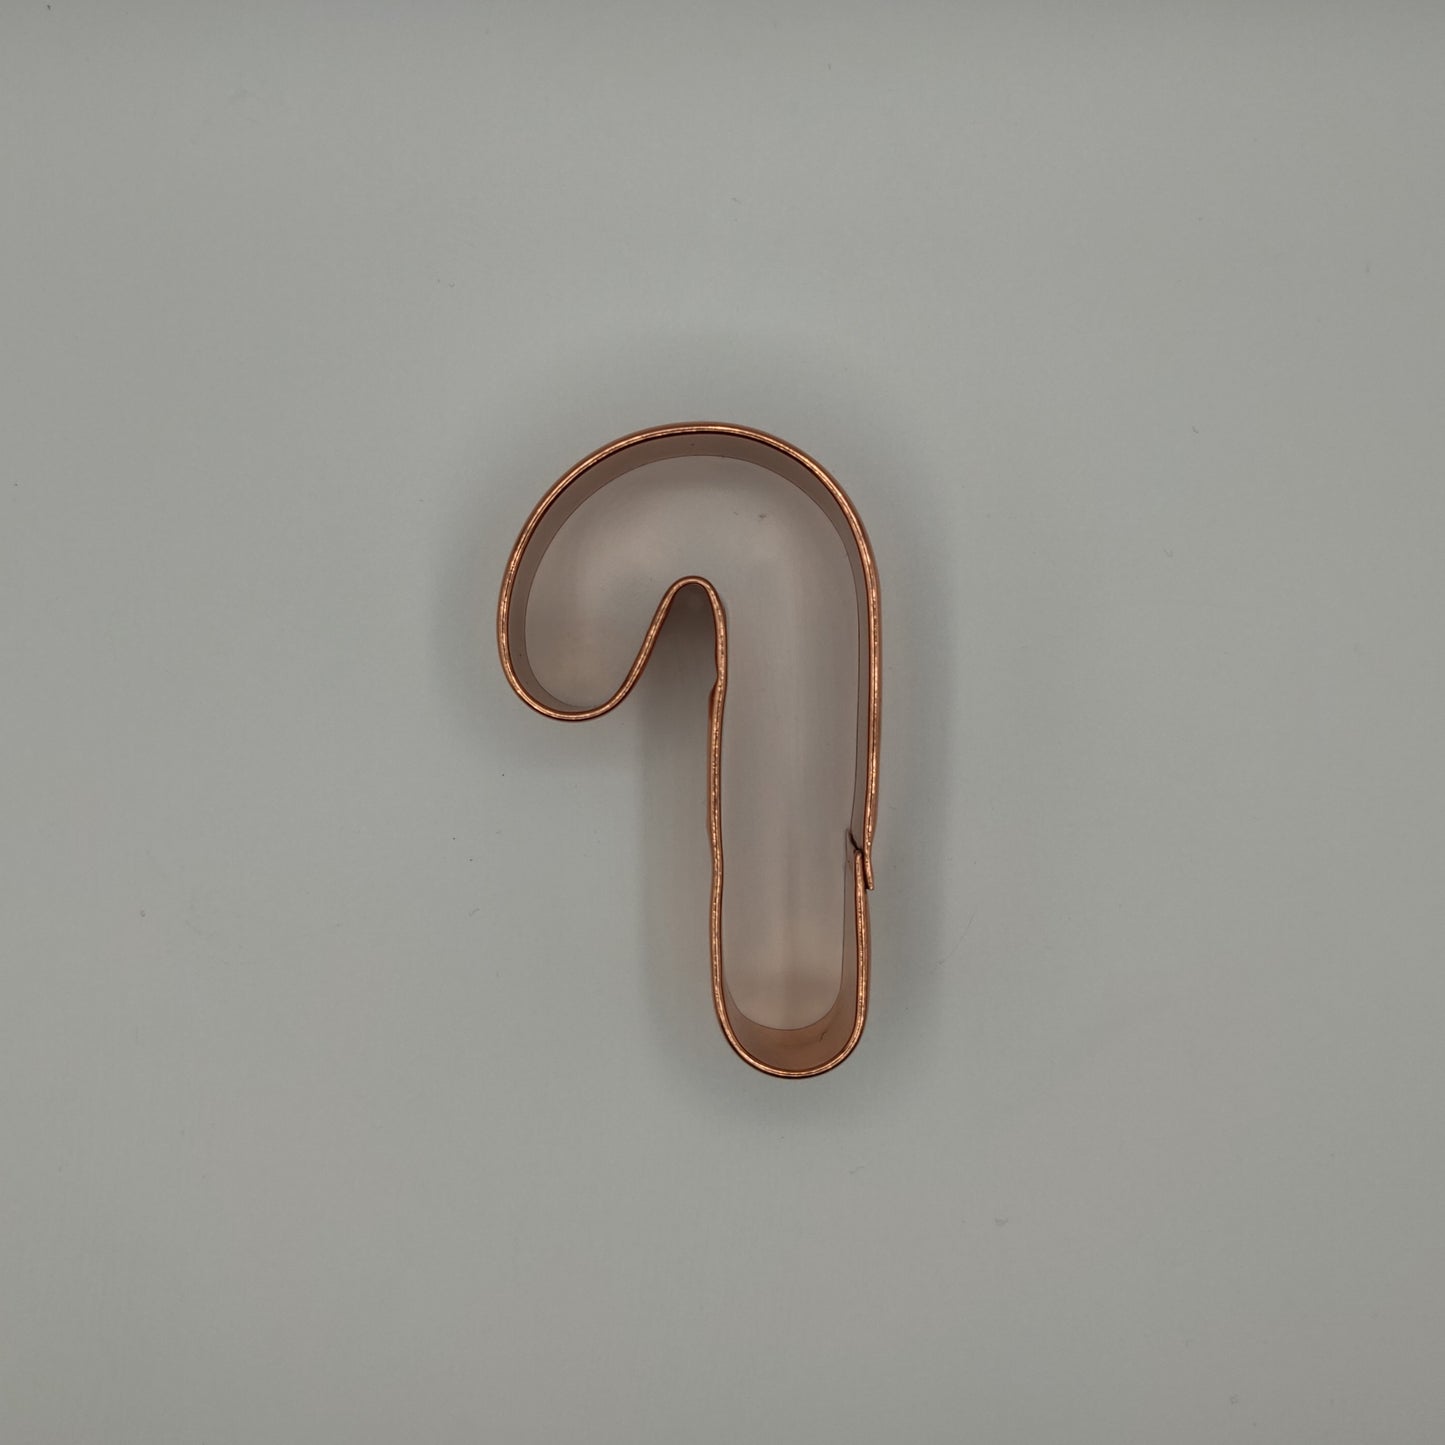 Copper Color Candy Cane Cookie Cutter (3 1/2")